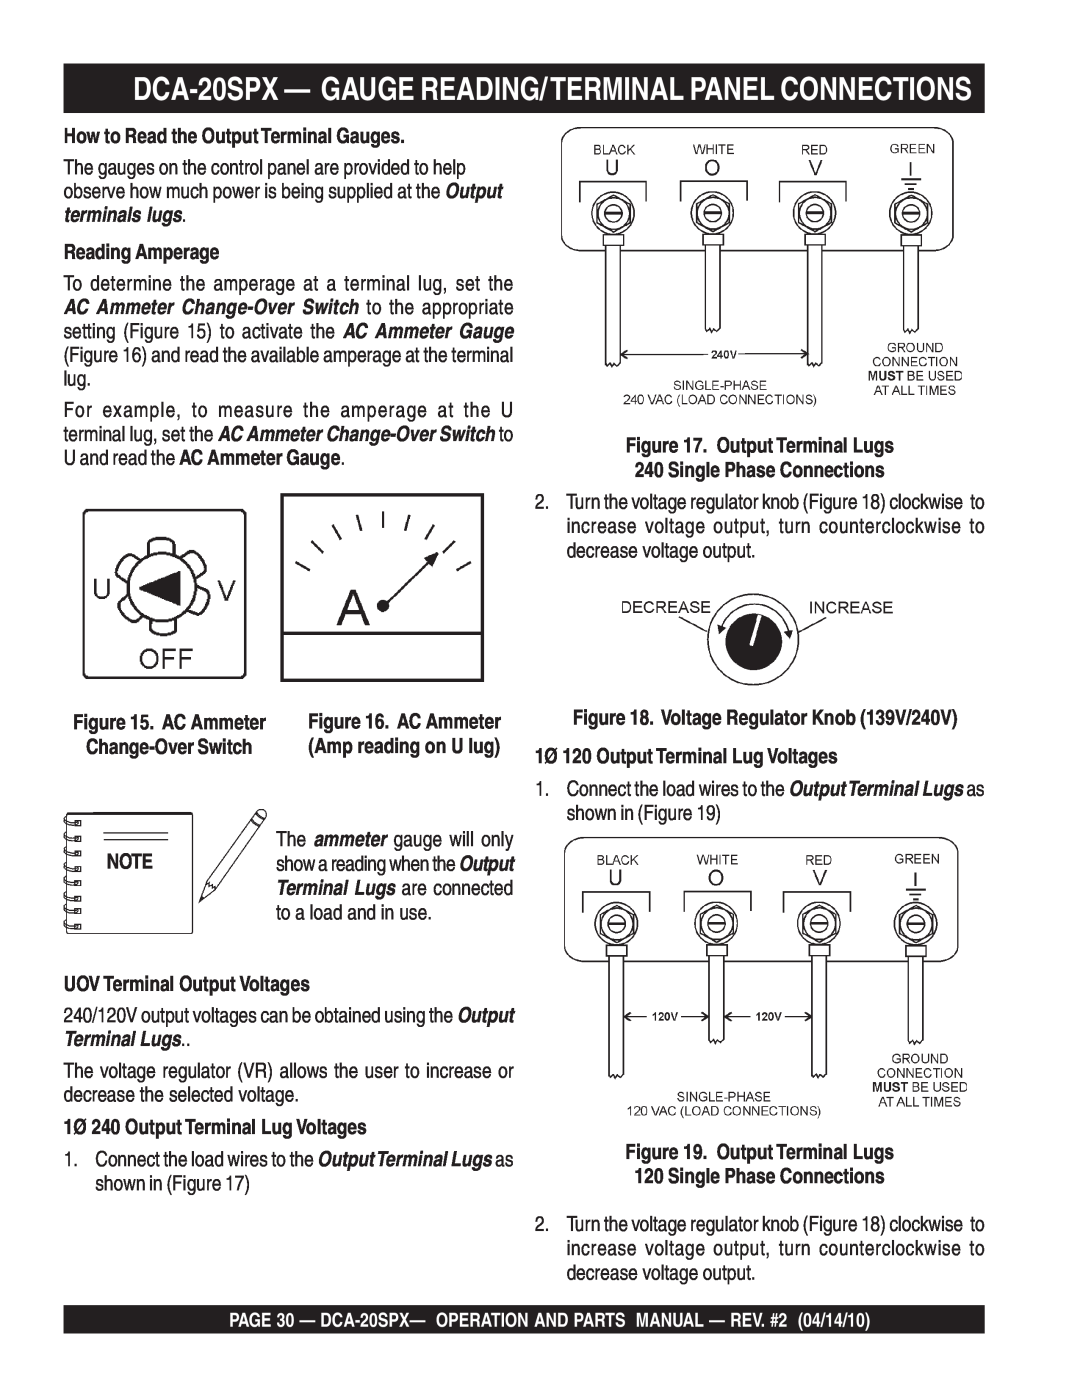 Multiquip operation manual DCA-20SPX - GAUGE READING/TERMINAL PANEL CONNECTIONS, How to Read the Output Terminal Gauges 